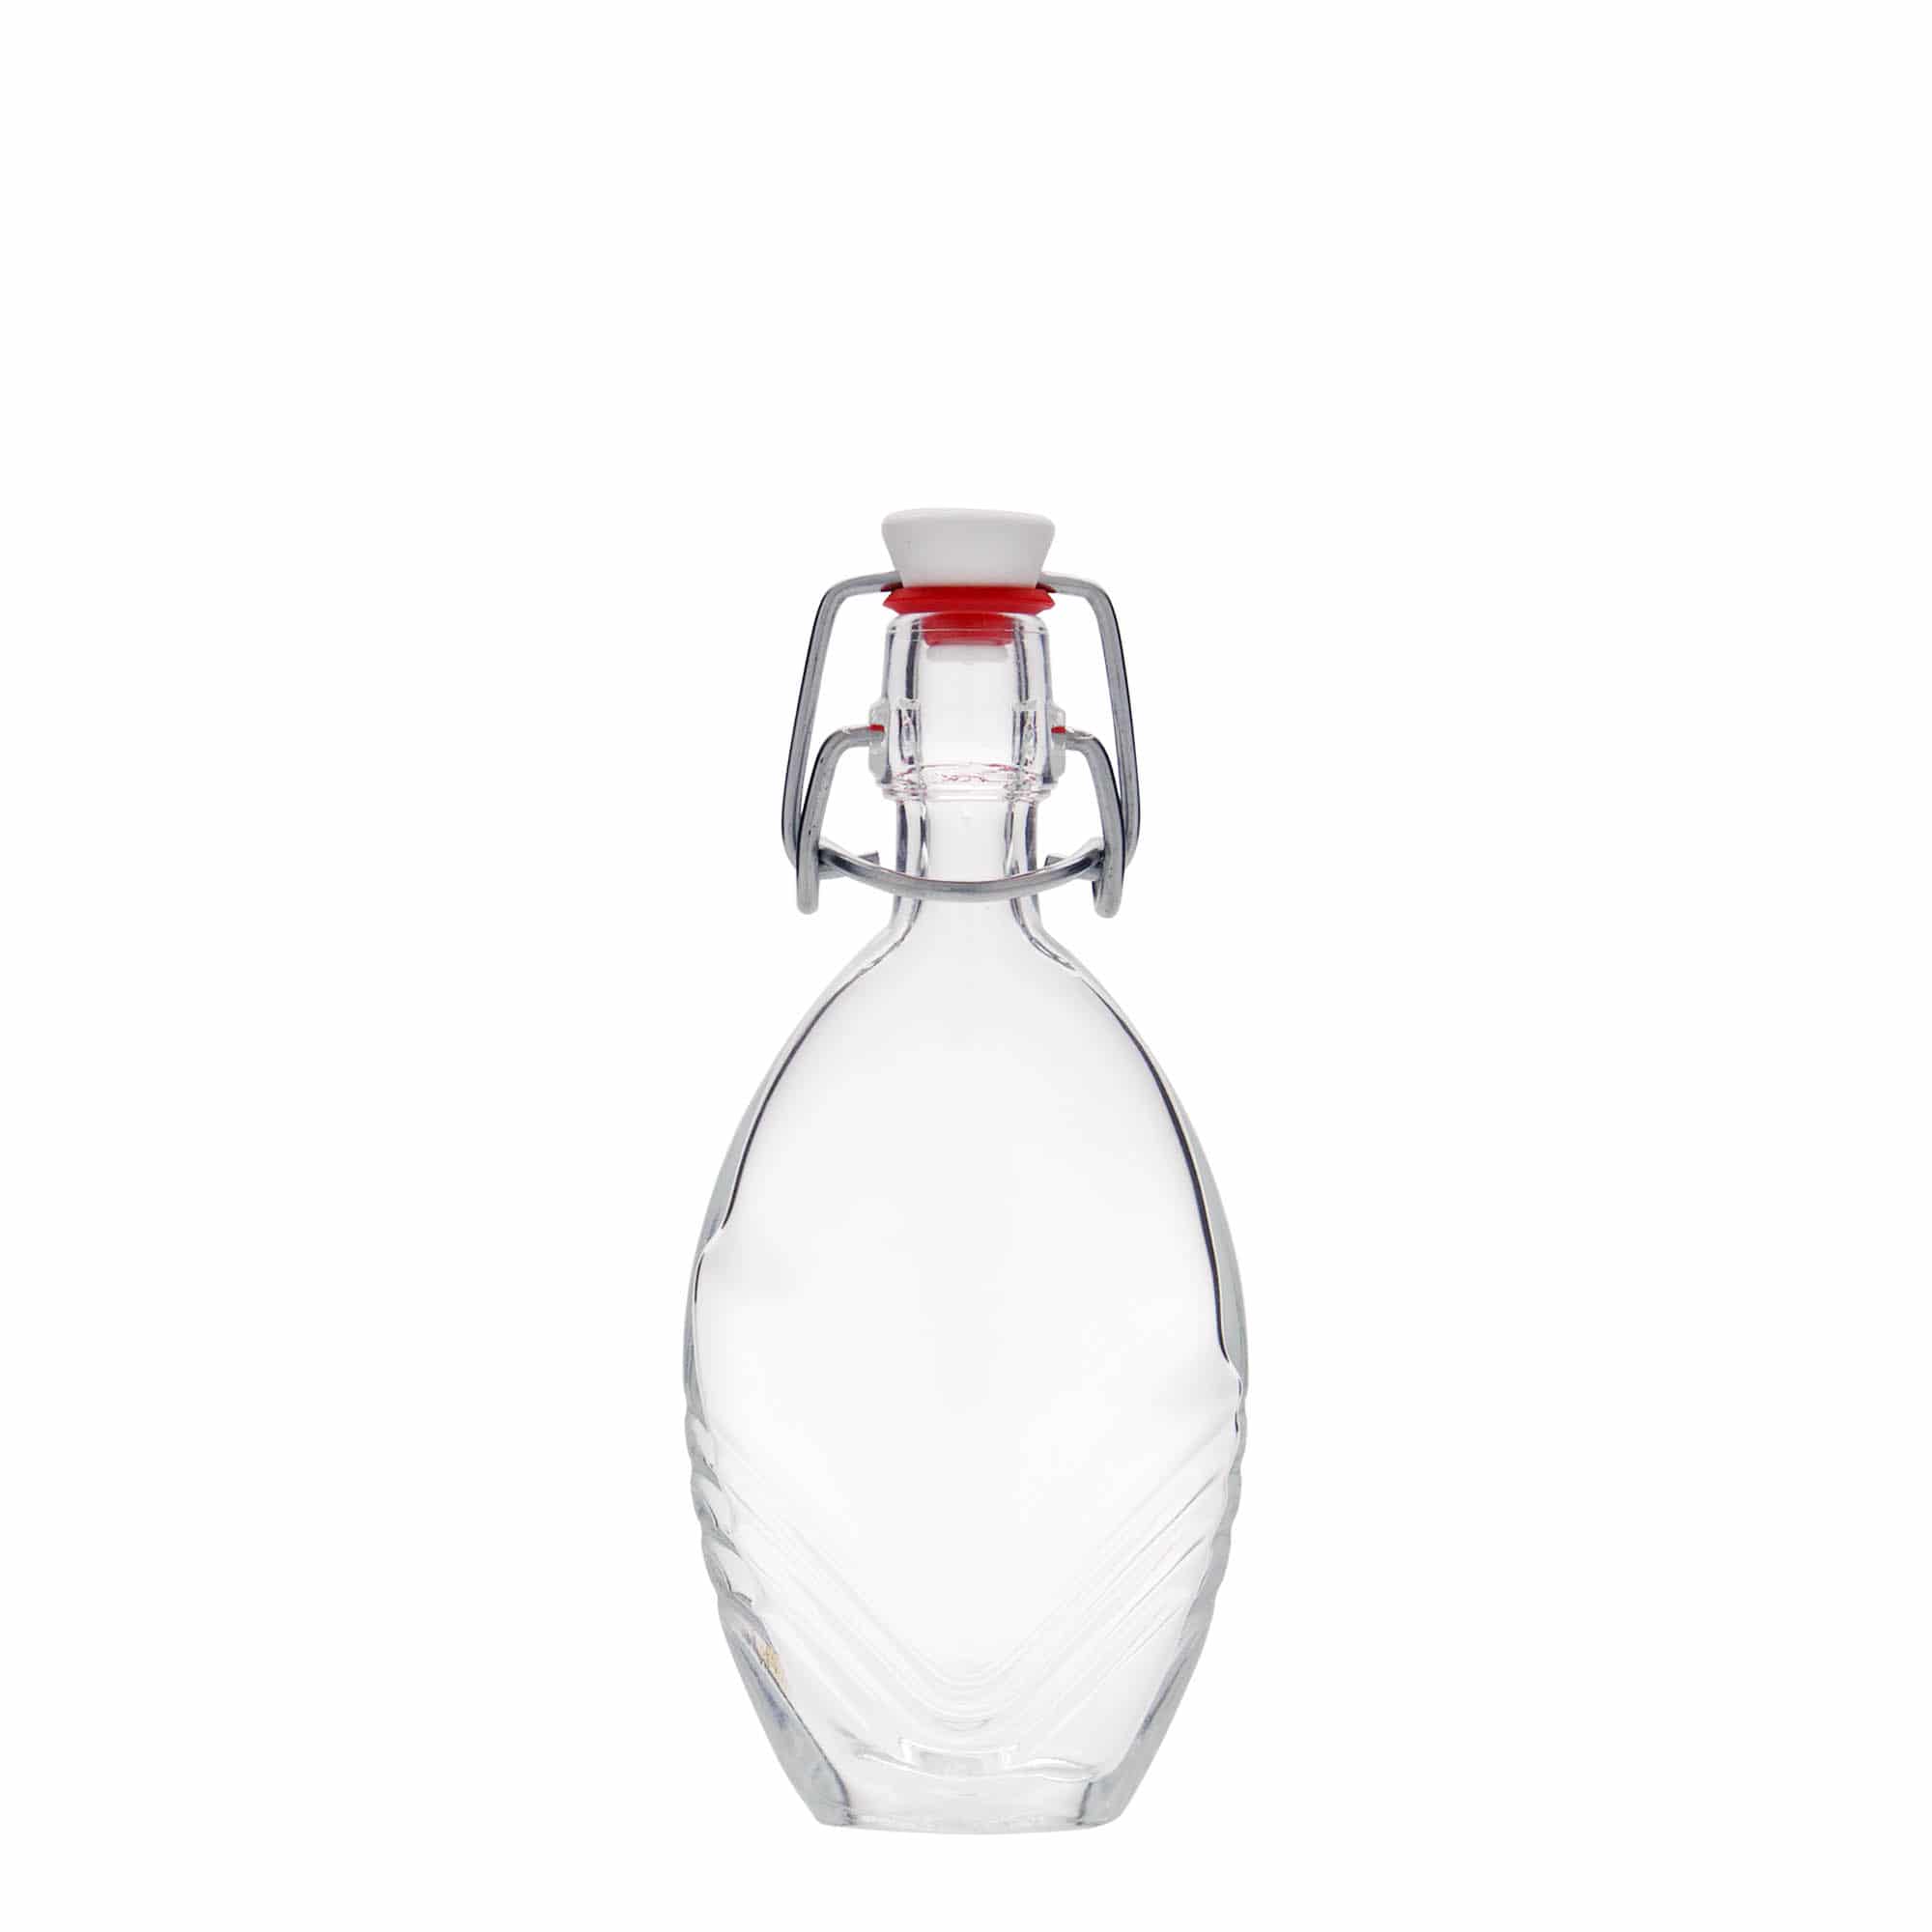 40 ml glass bottle 'Florence', oval, closure: swing top